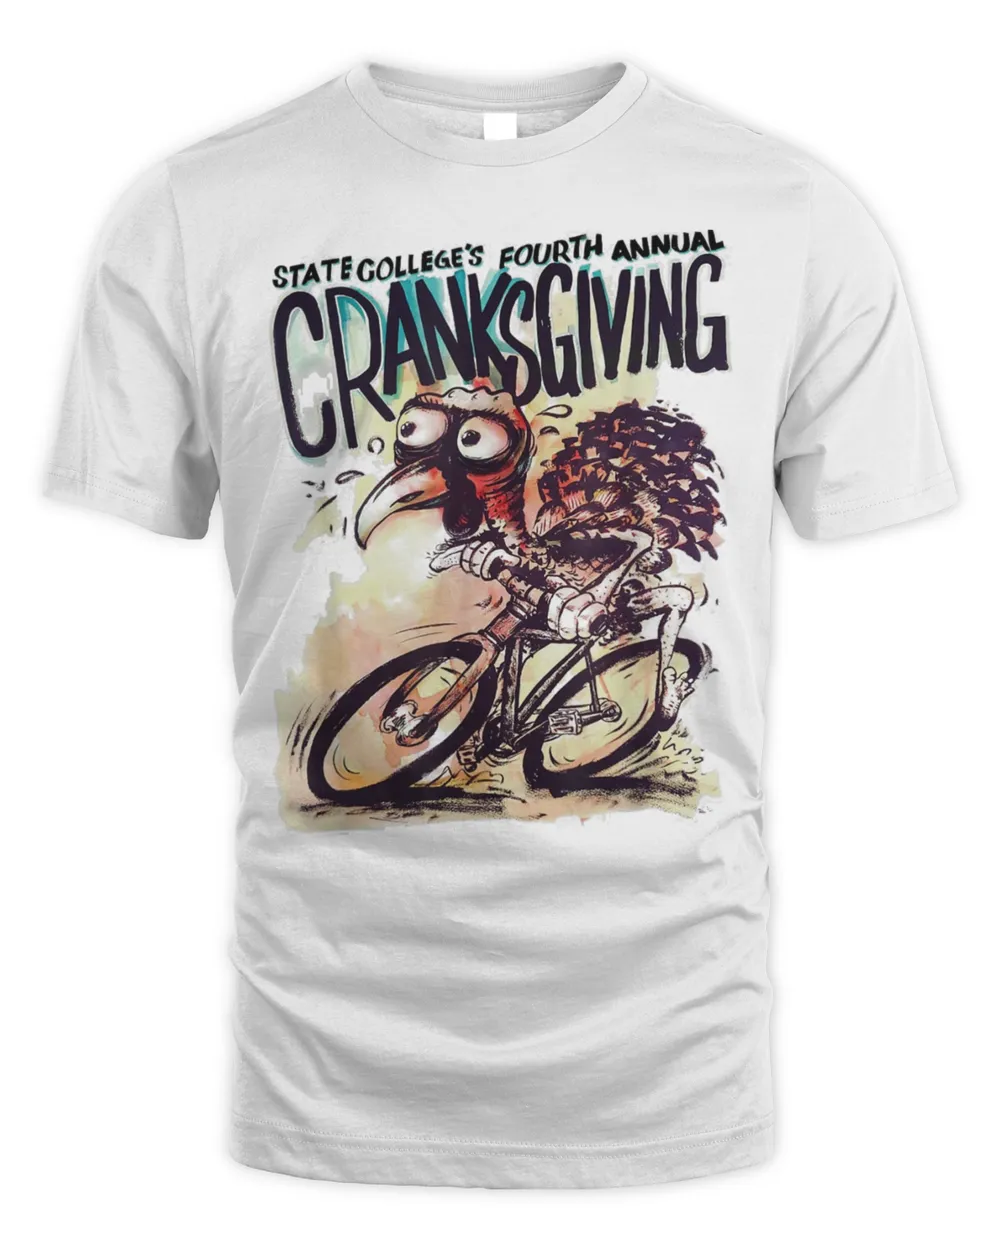 Cranksgiving State College PA 4th Annual Event T-Shirt